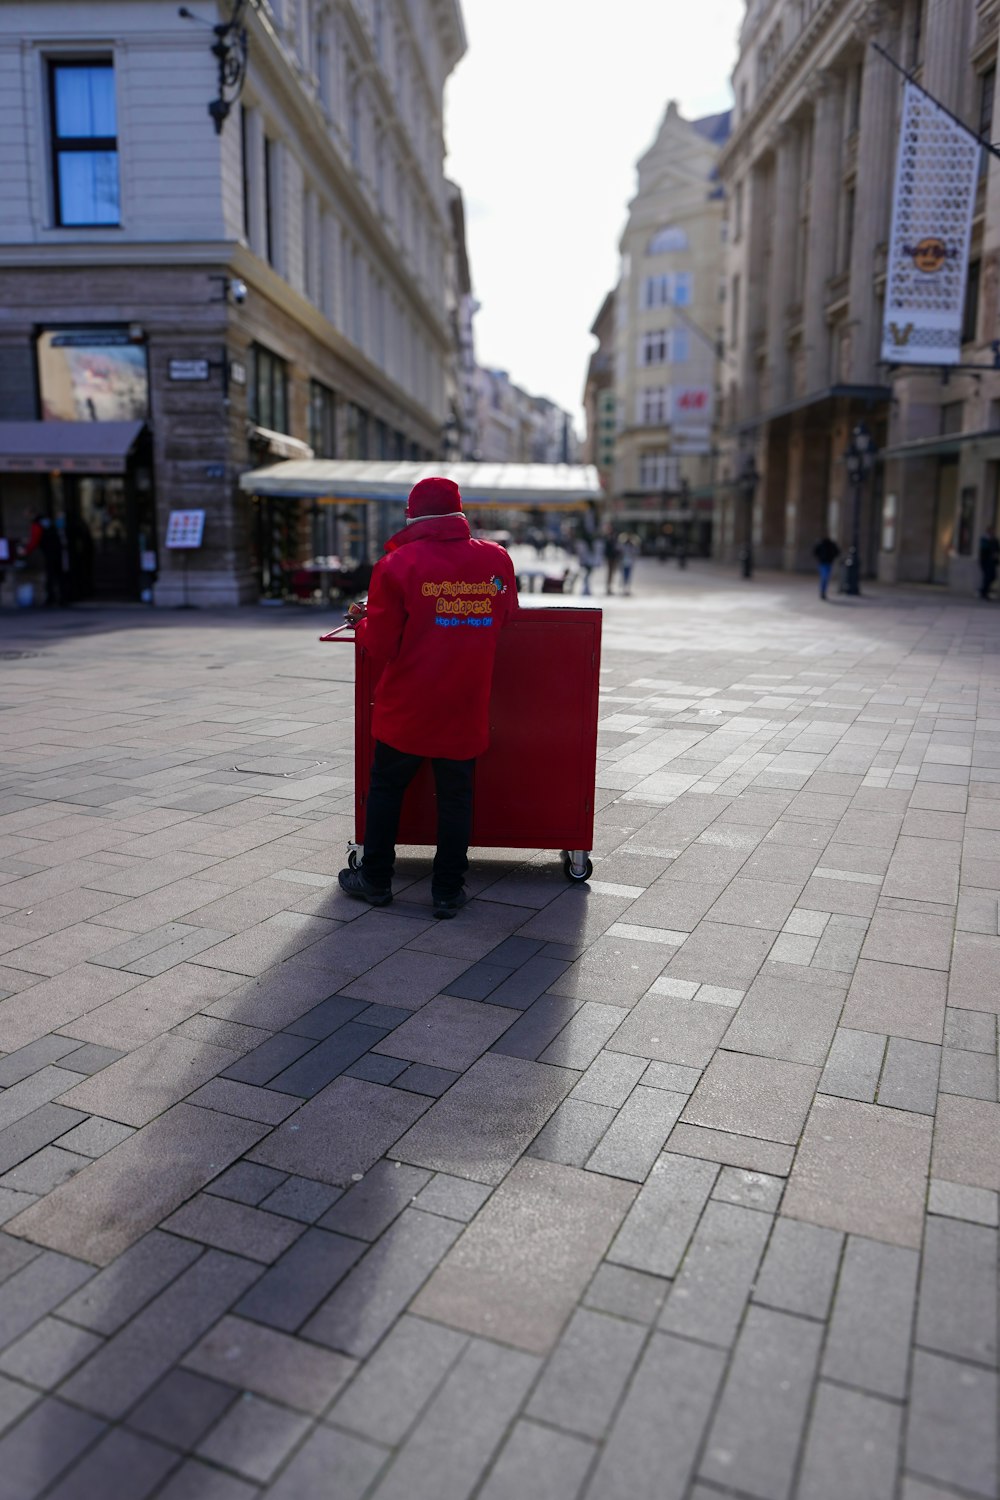 a person in a red coat sitting on a red chair